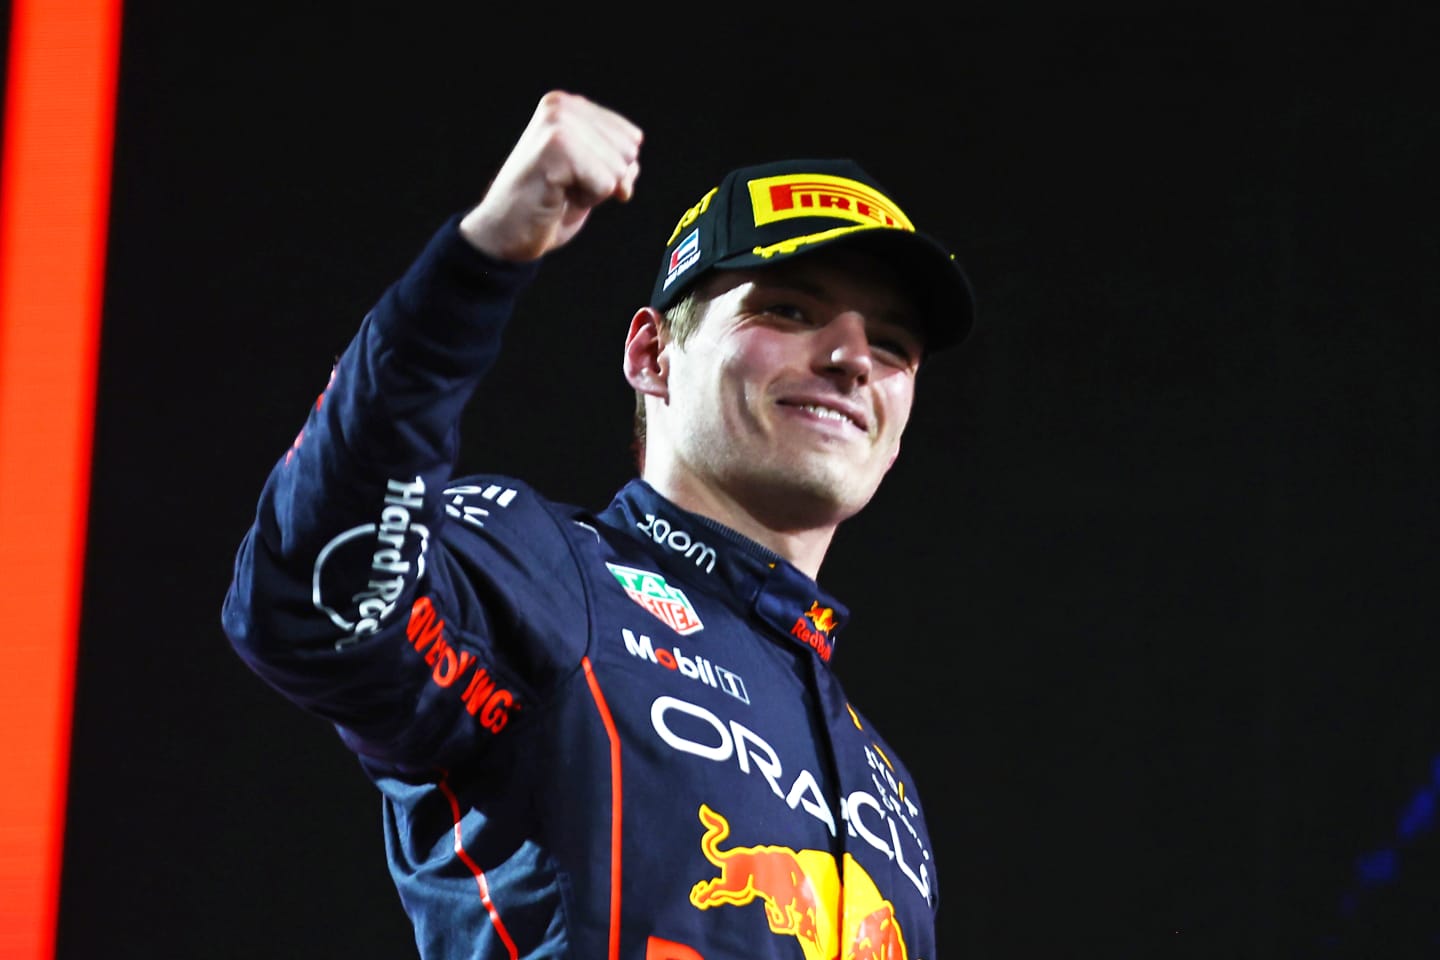 ABU DHABI, UNITED ARAB EMIRATES - NOVEMBER 20: Race winner Max Verstappen of the Netherlands and Oracle Red Bull Racing celebrates on the podium following the F1 Grand Prix of Abu Dhabi at Yas Marina Circuit on November 20, 2022 in Abu Dhabi, United Arab Emirates. (Photo by Mark Thompson/Getty Images)